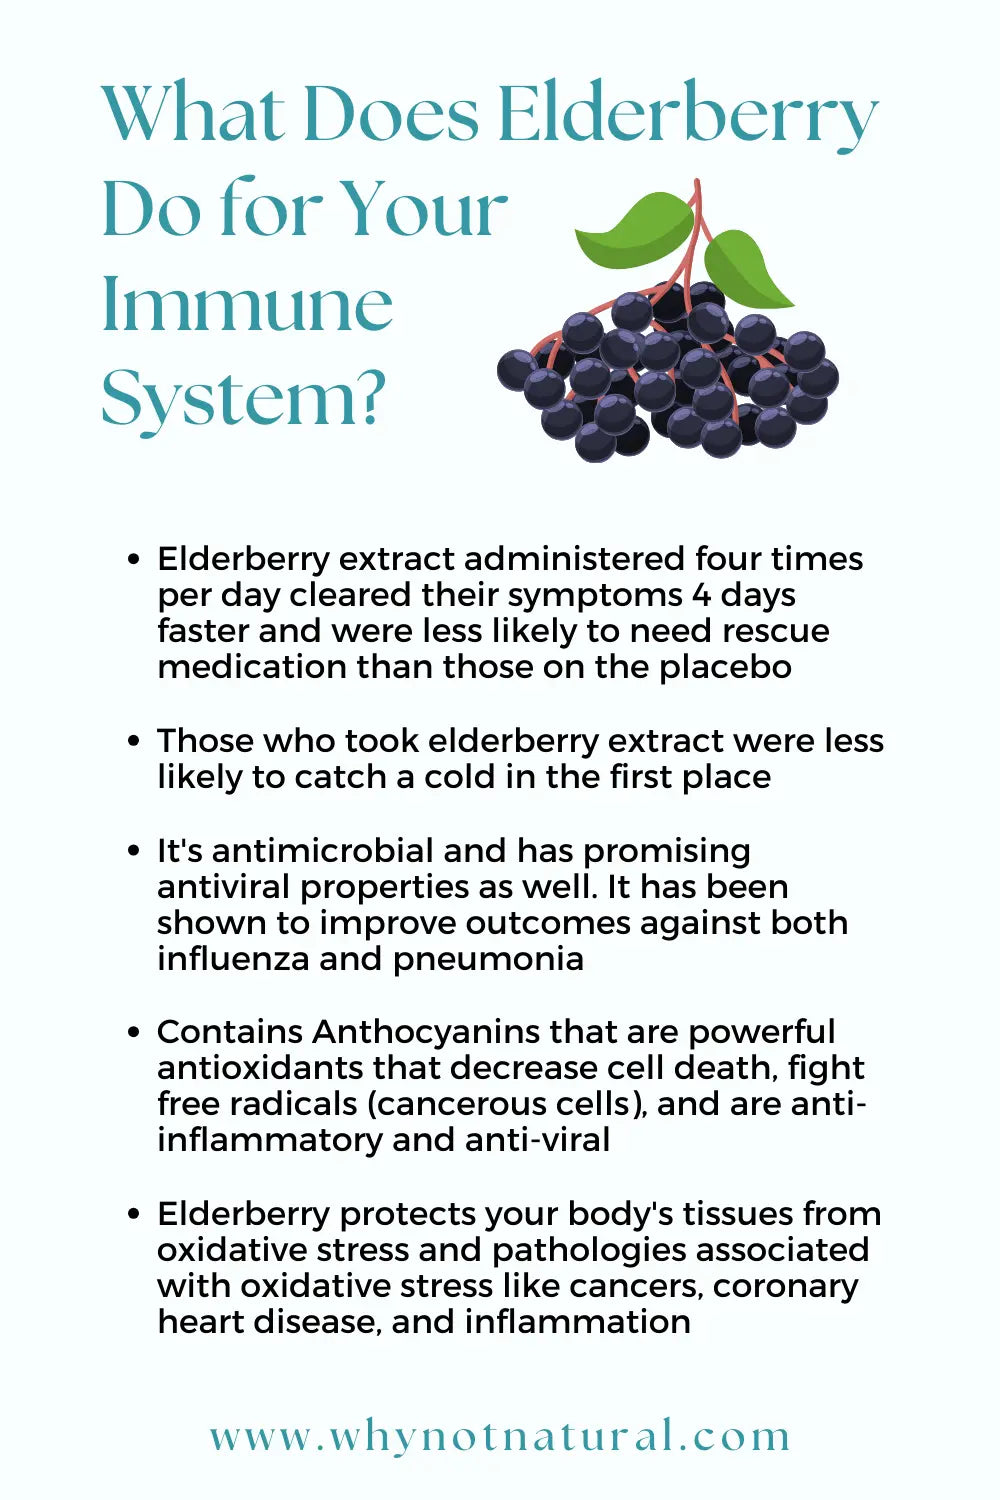 What Does Elderberry Do for Your Immune System